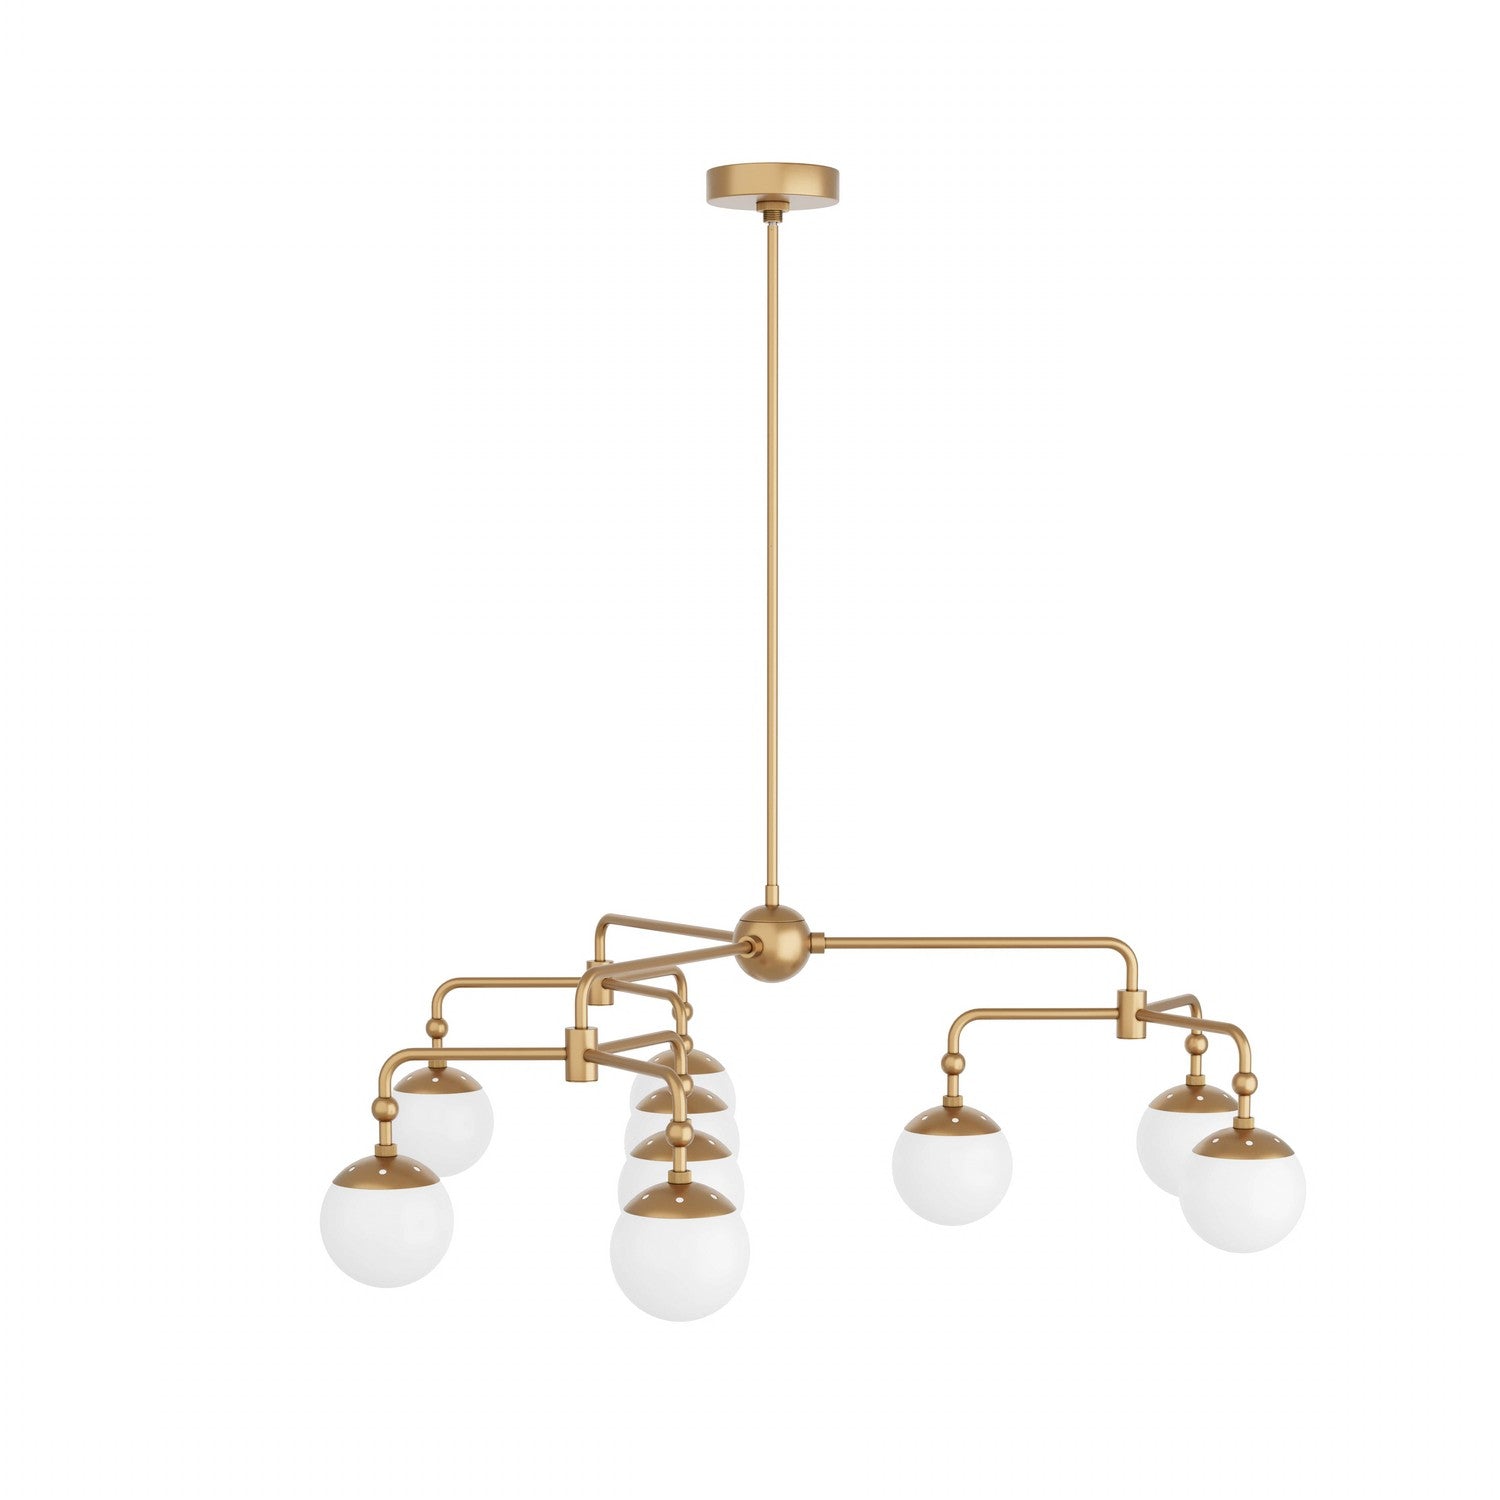 Nine Light Chandelier from the Utica collection in Antique Brass finish